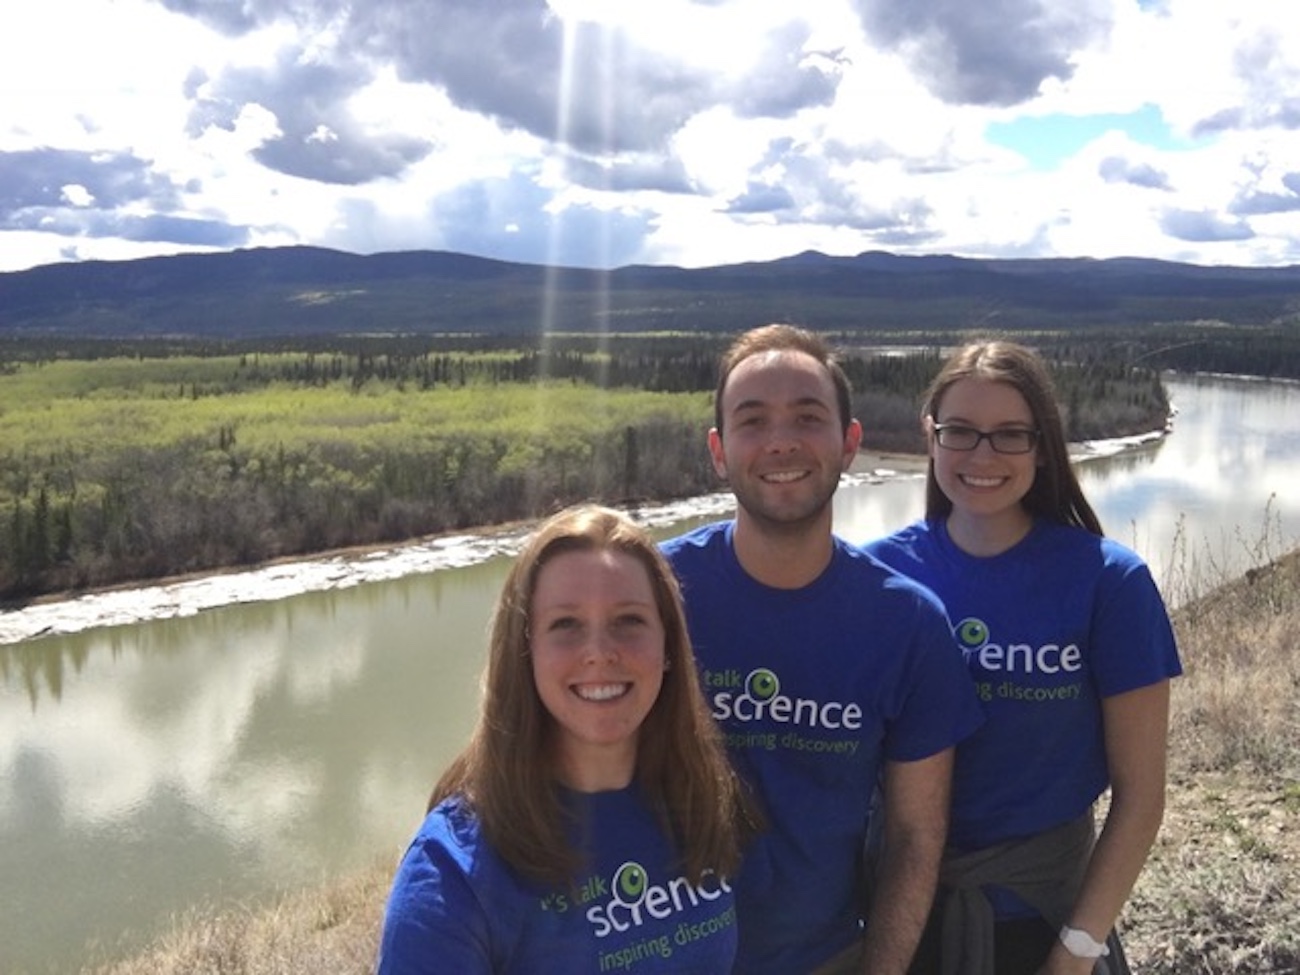 Ian Dimopoulos with other Let's Talk Science volunteers in front of a river and cloudy sky